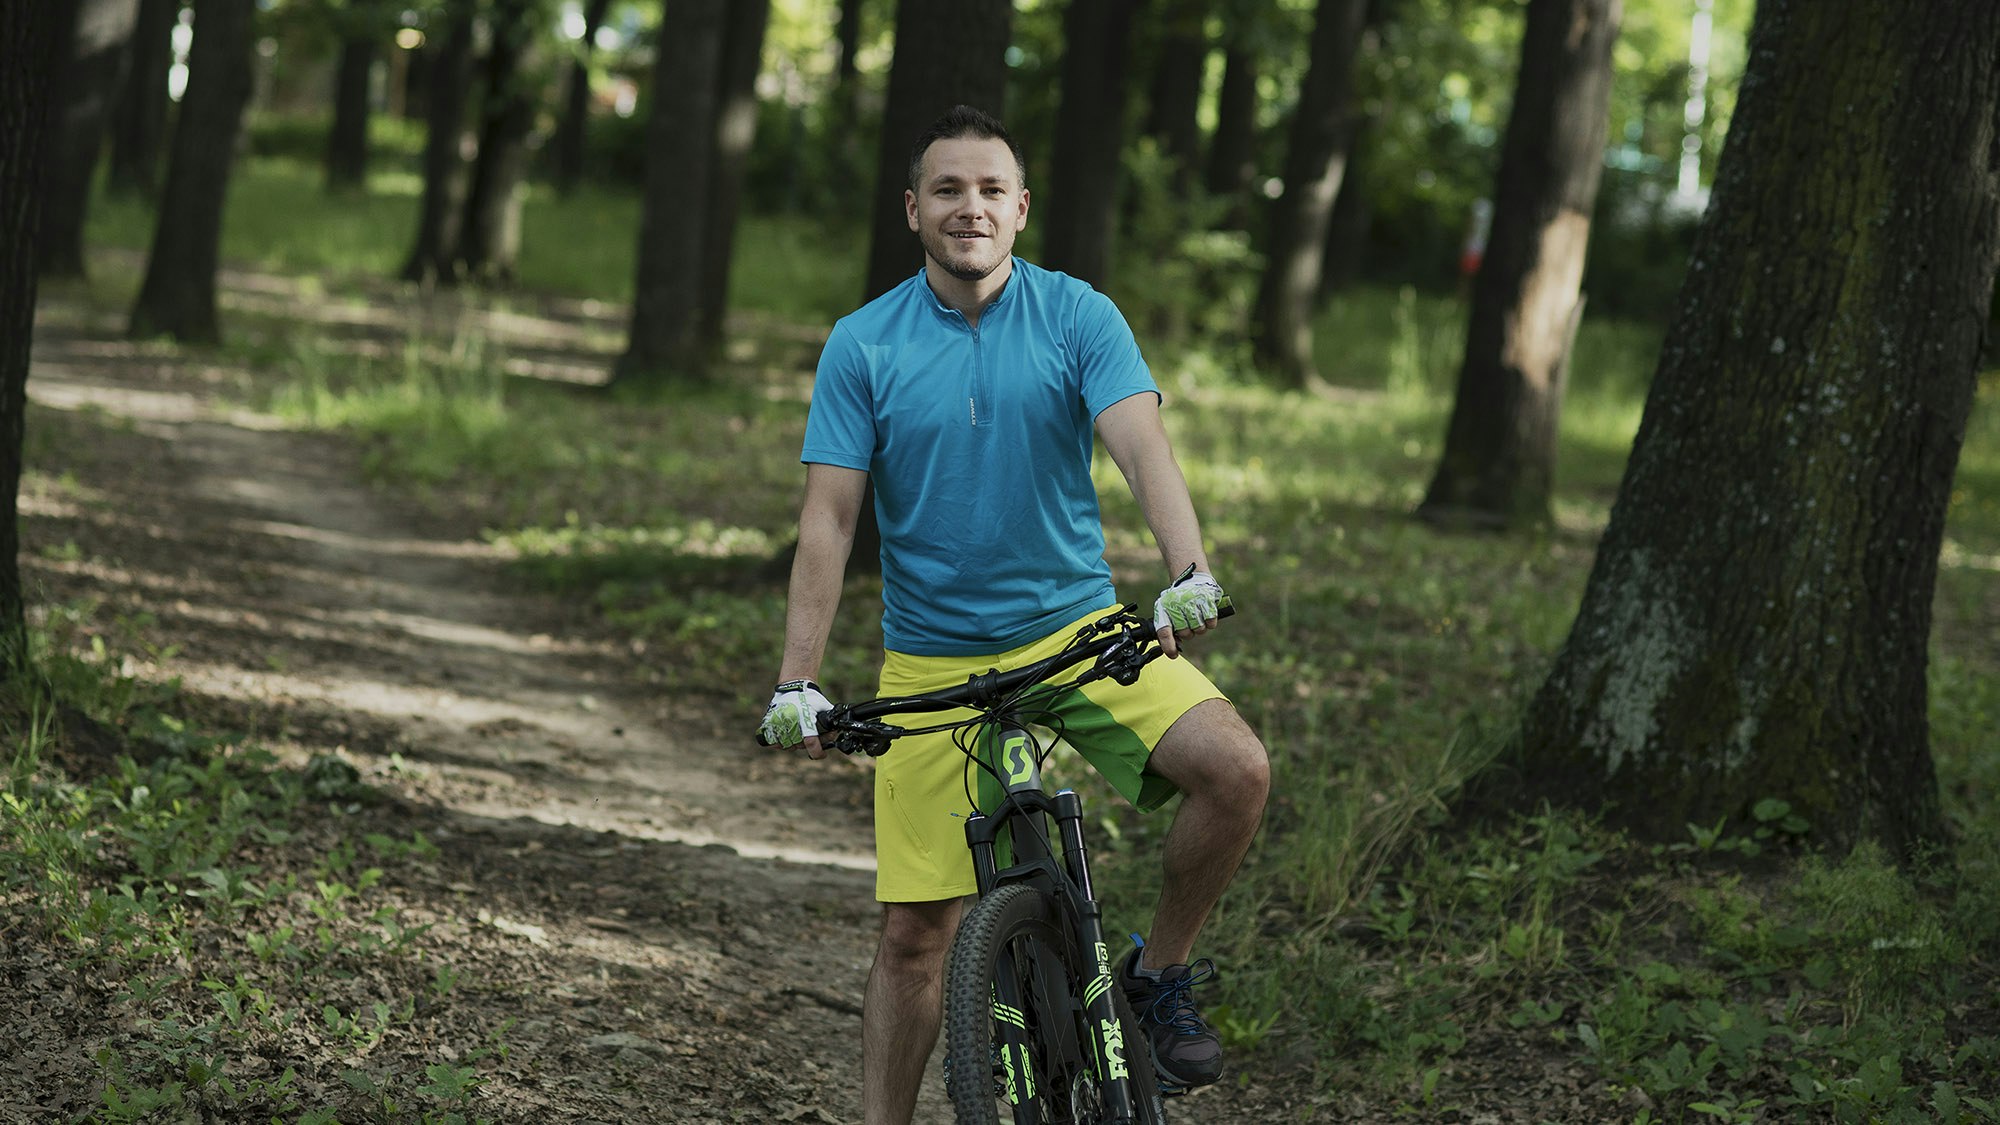 Nikolay on top of his bicycle in the middle of a forest